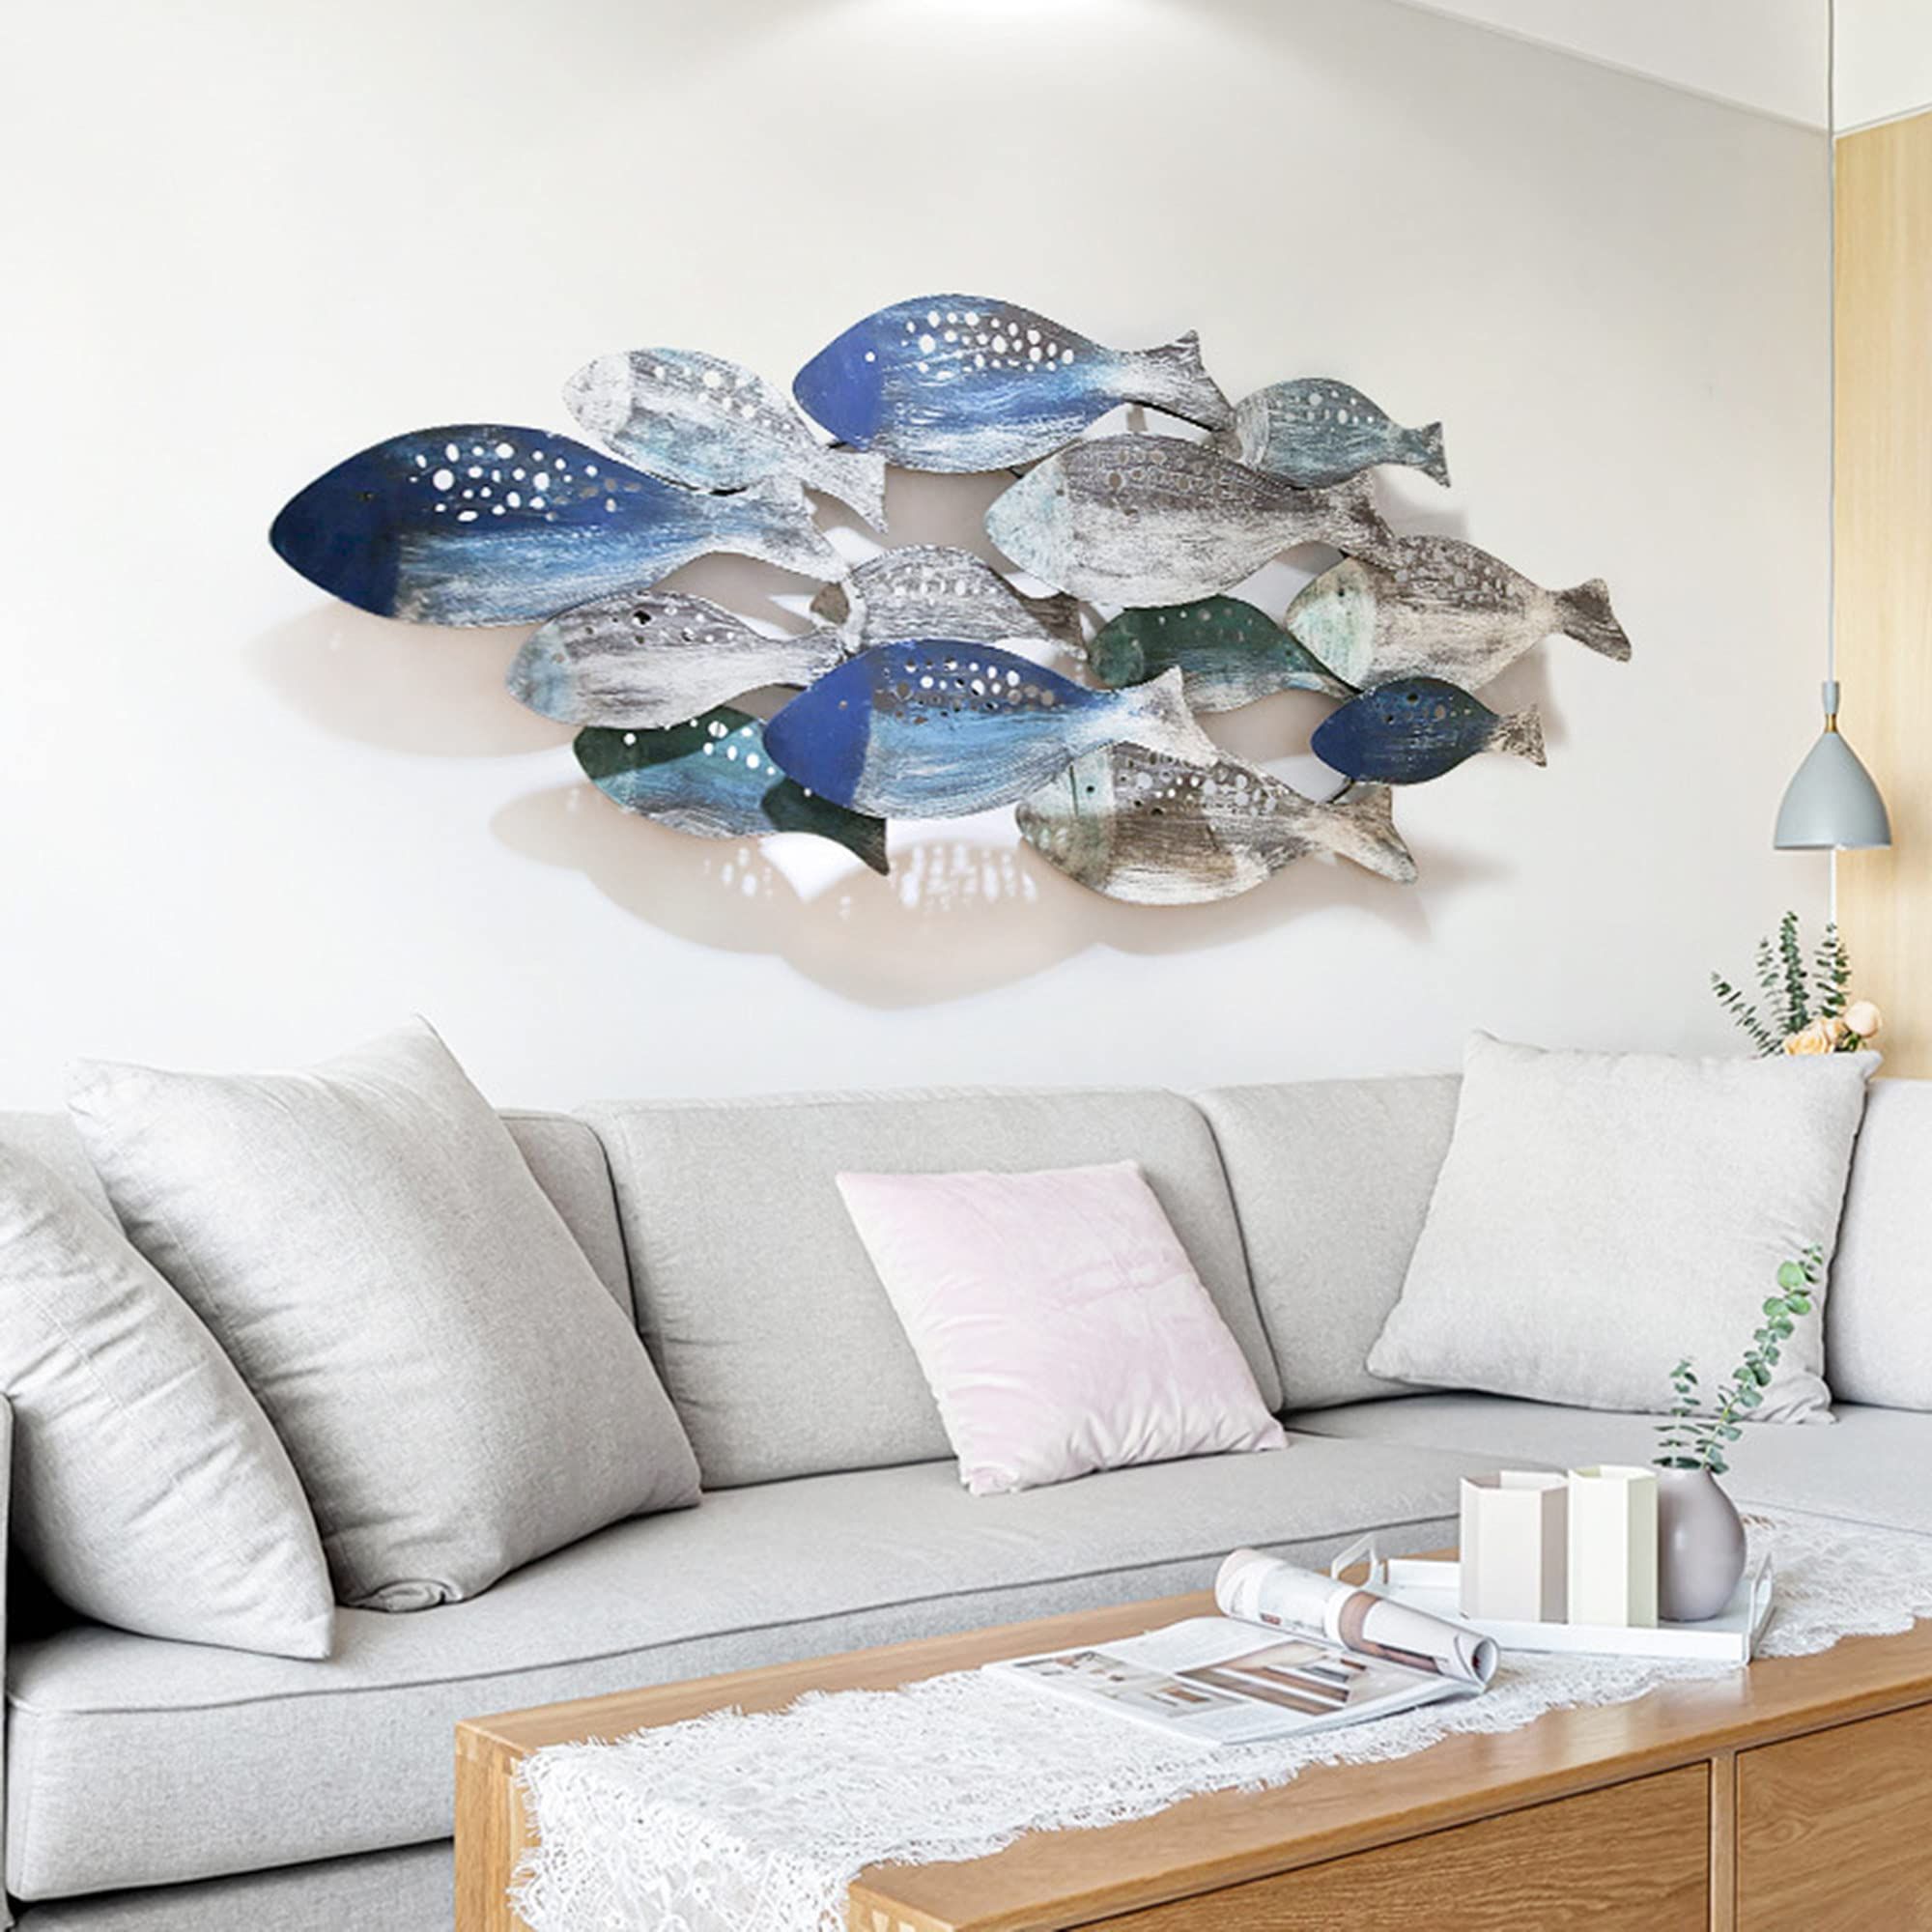 Most Current Metal Coastal Ocean Wall Art Regarding Amazon: Fmxymc Coastal Ocean Metal Fish Wall Decor, 50"x 20" Large 3d Fish  Wall Sculpture, Hand Painted Fish Hanging Decoration, For Living  Room/bedroom/dining Room : Home & Kitchen (View 4 of 15)